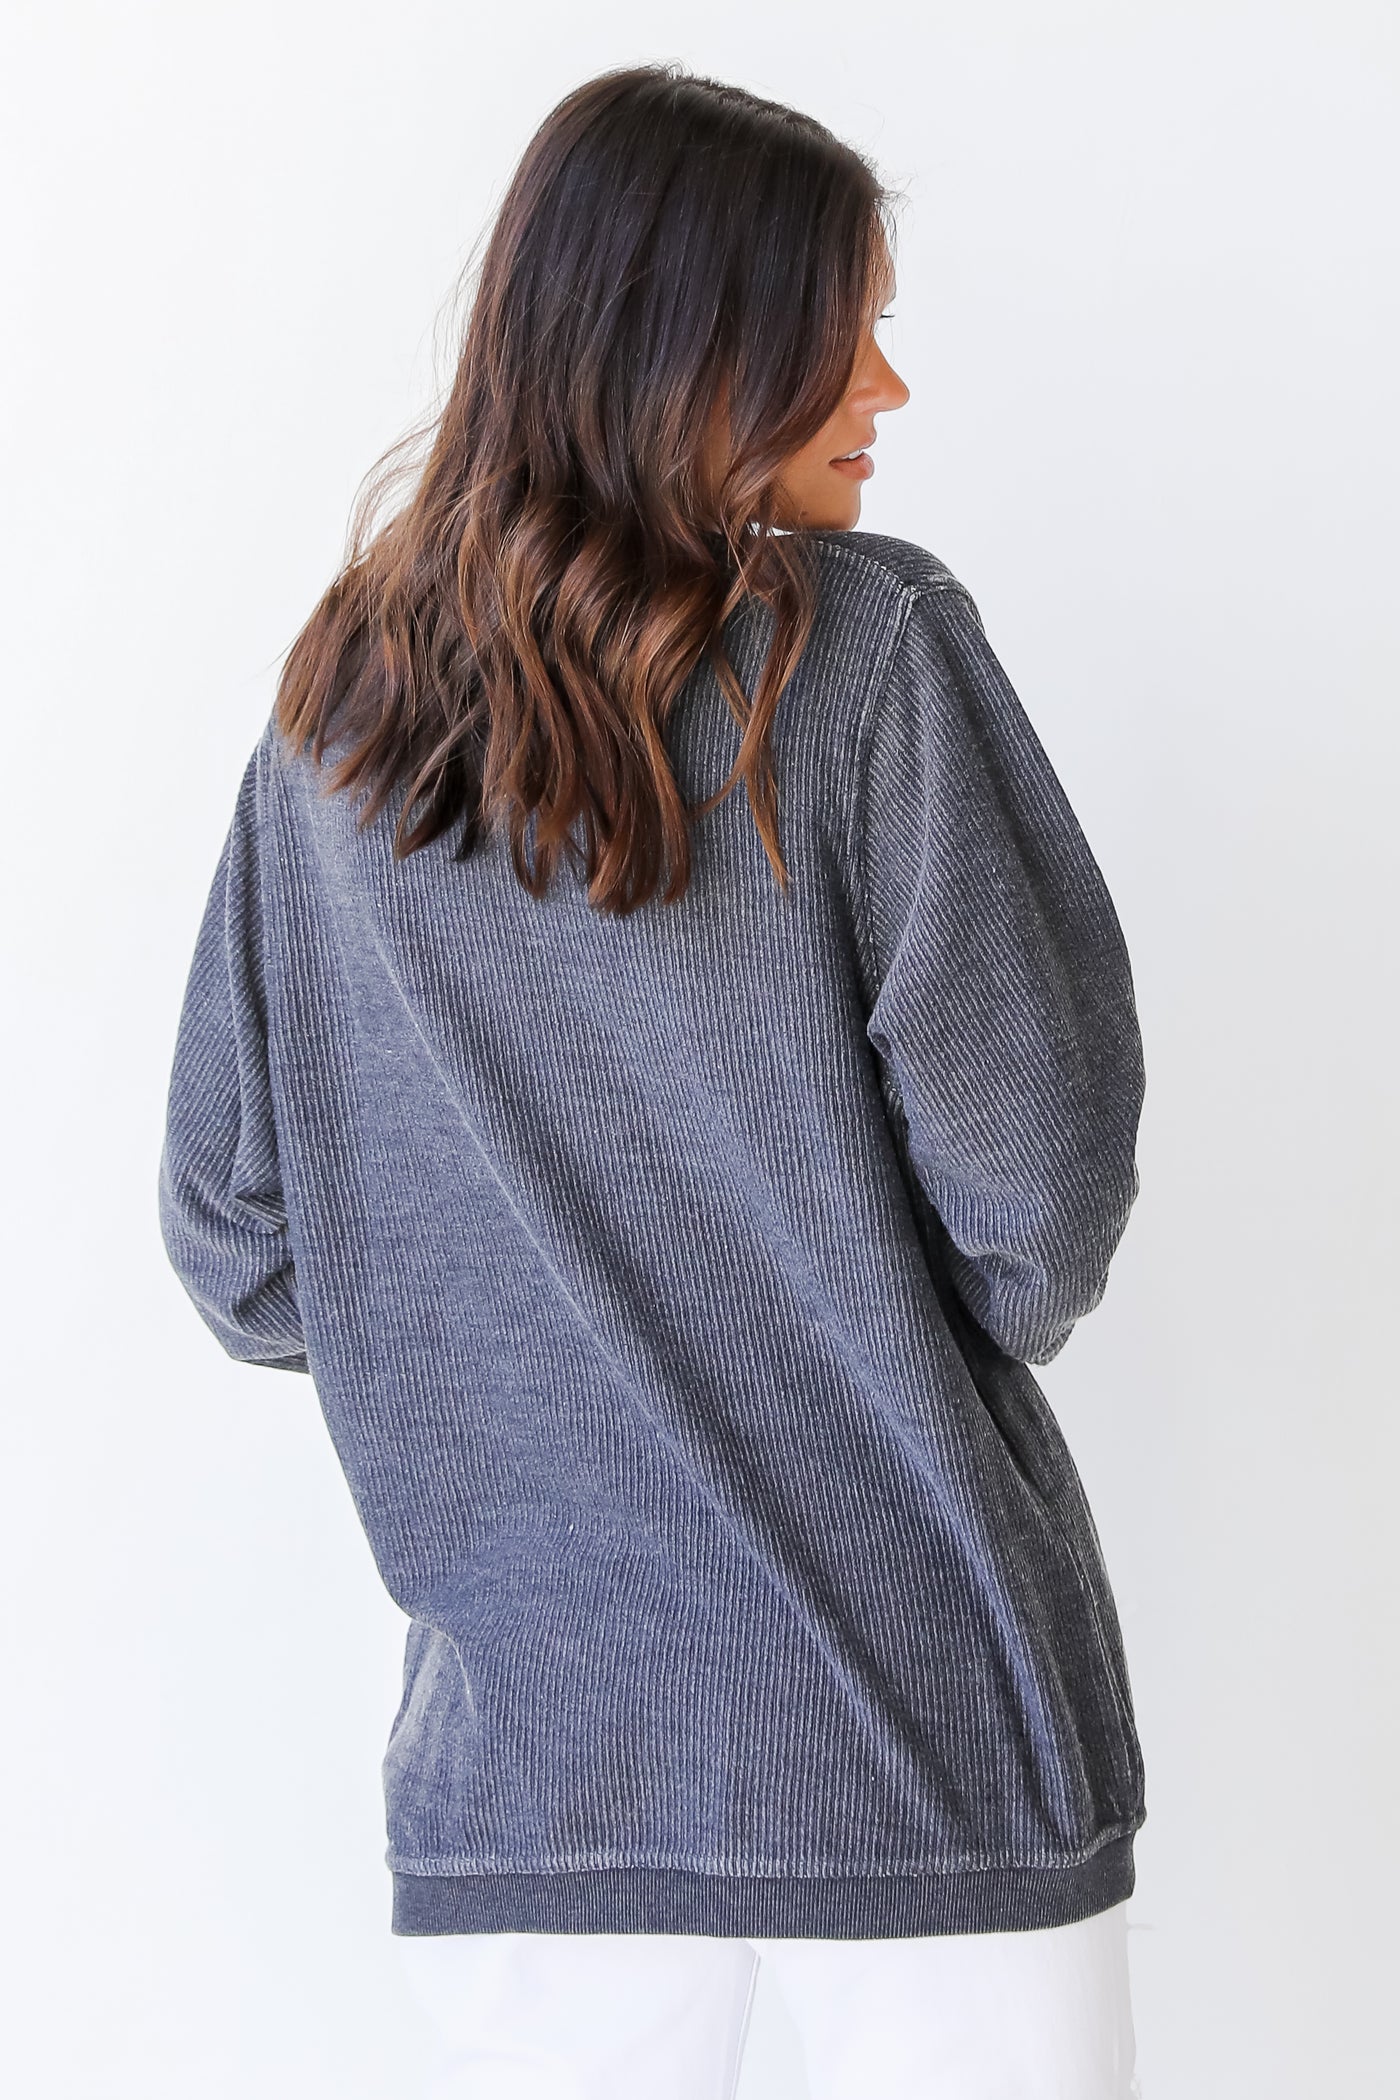 Dolly Corded Pullover back view